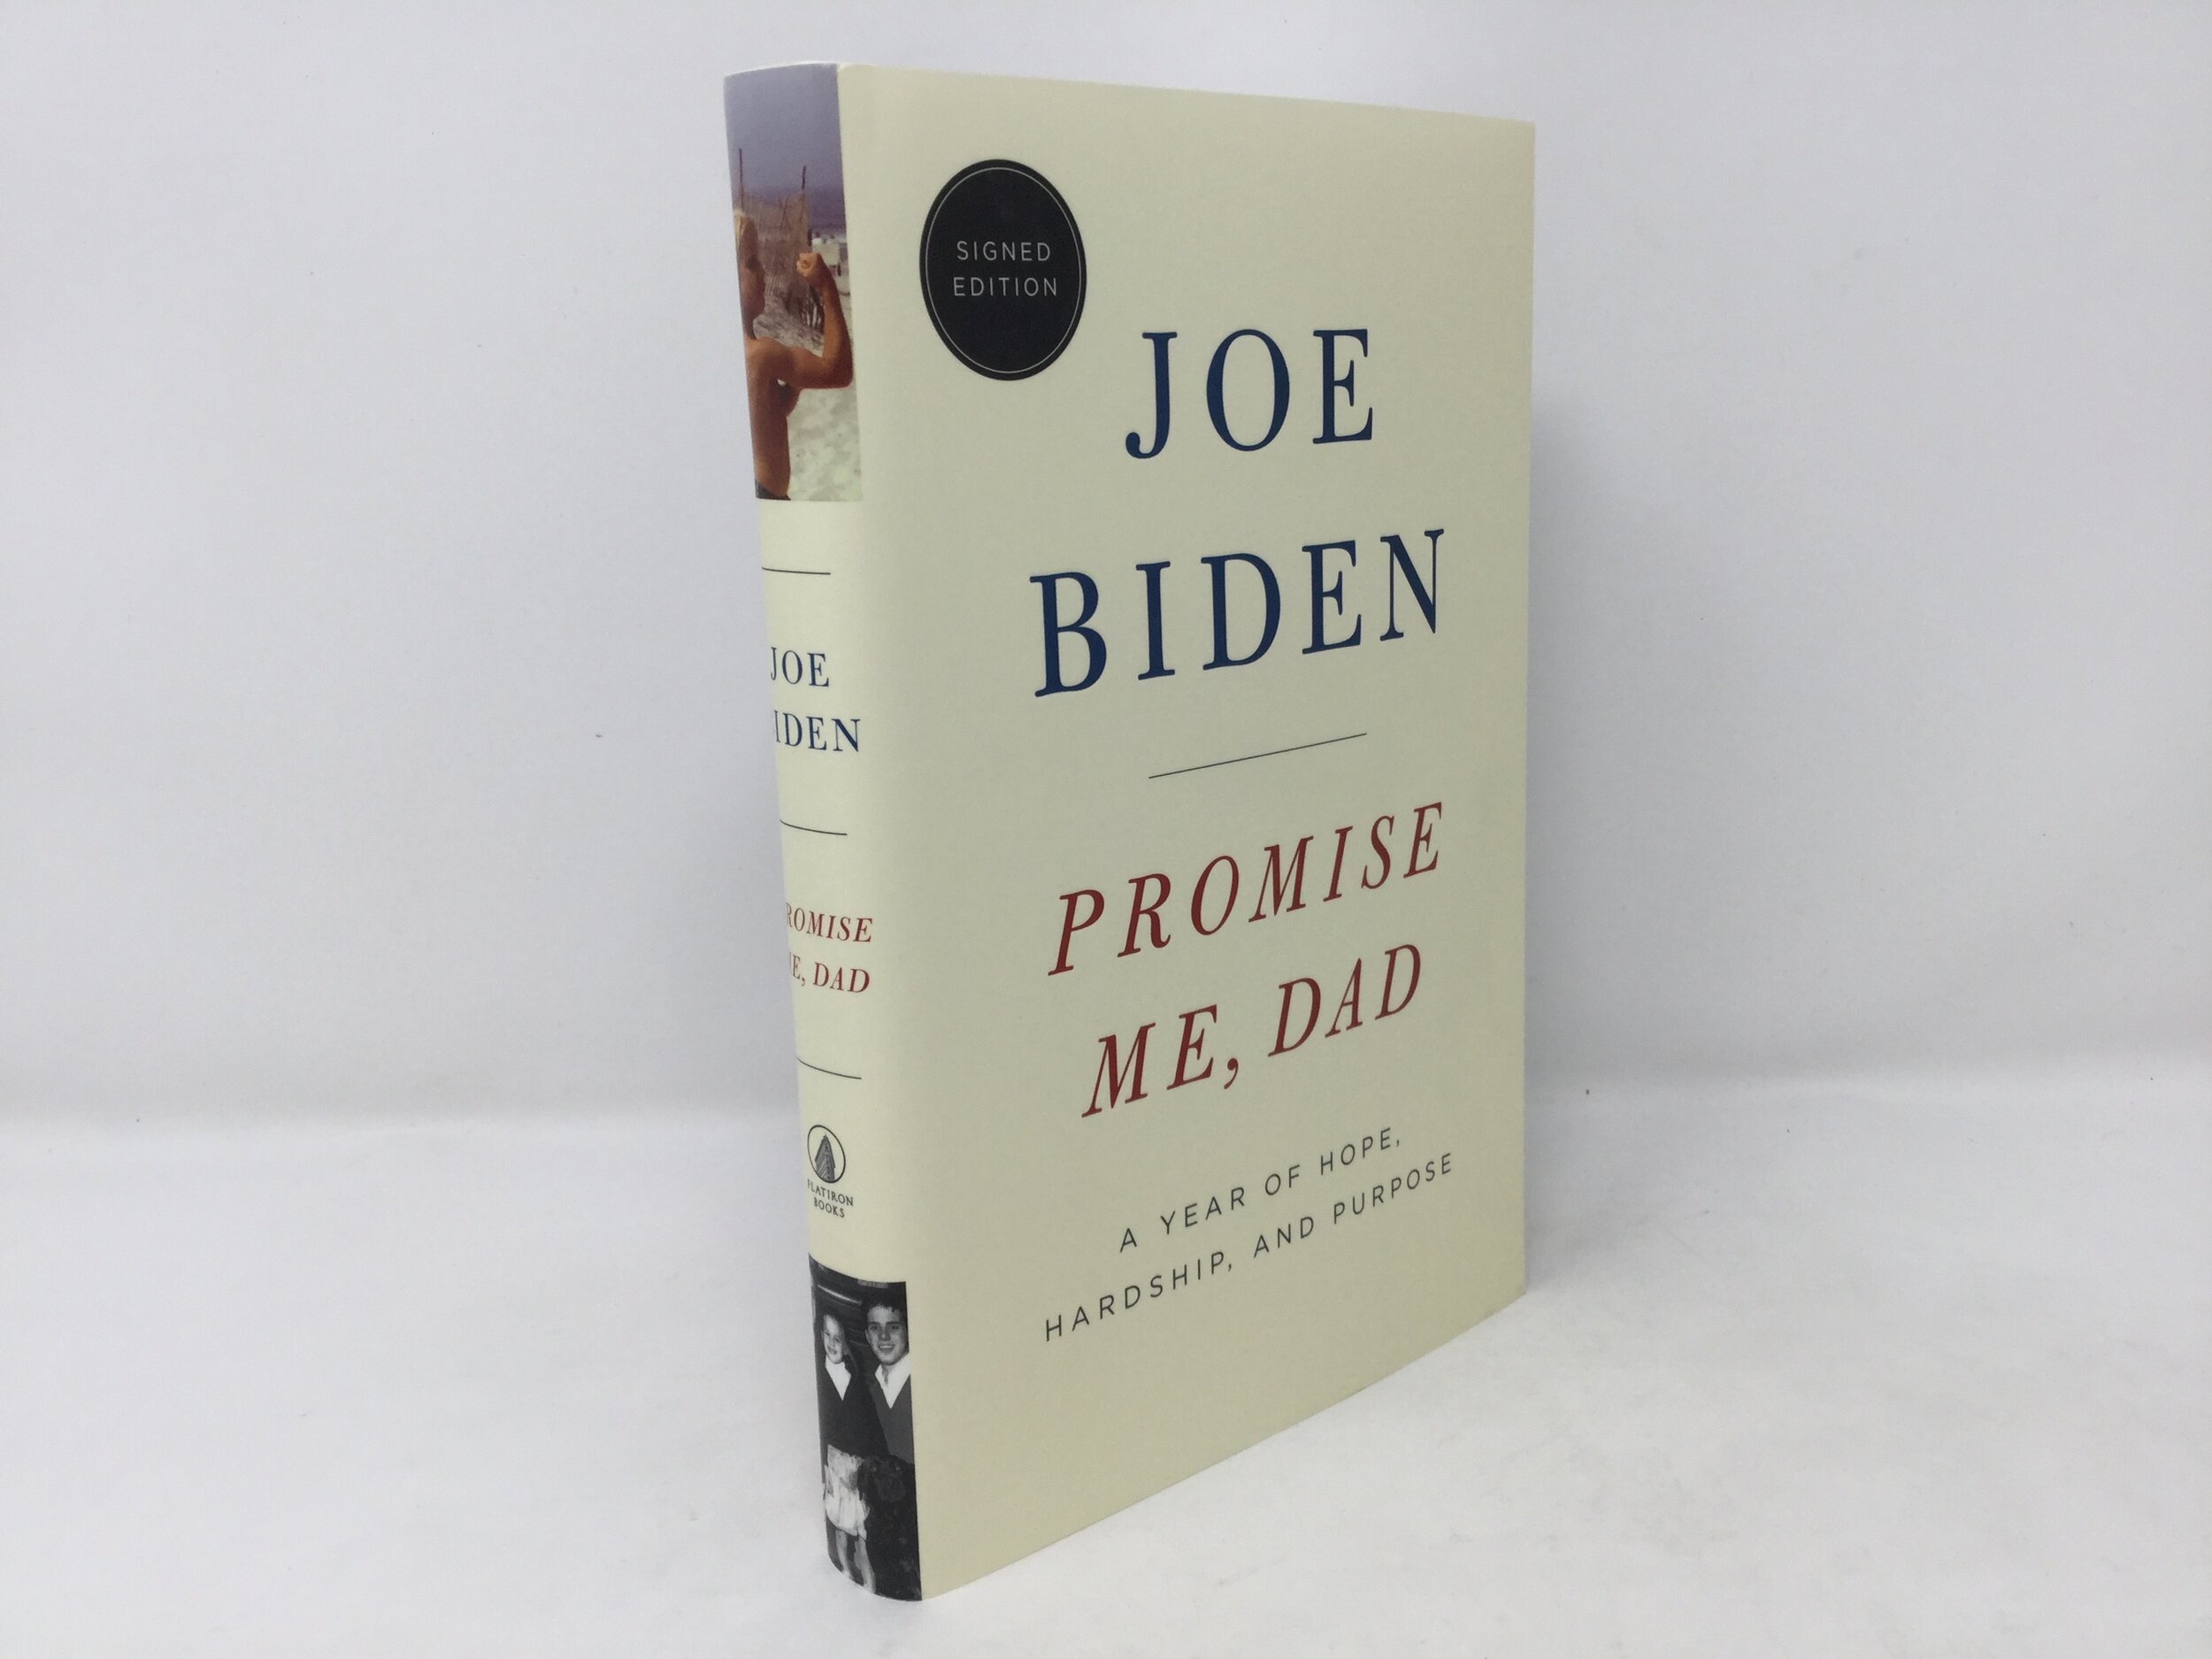 SIGNED FIRST EDITION Promise Me Dad Year of Hope Hardship 2017 Joe Biden 